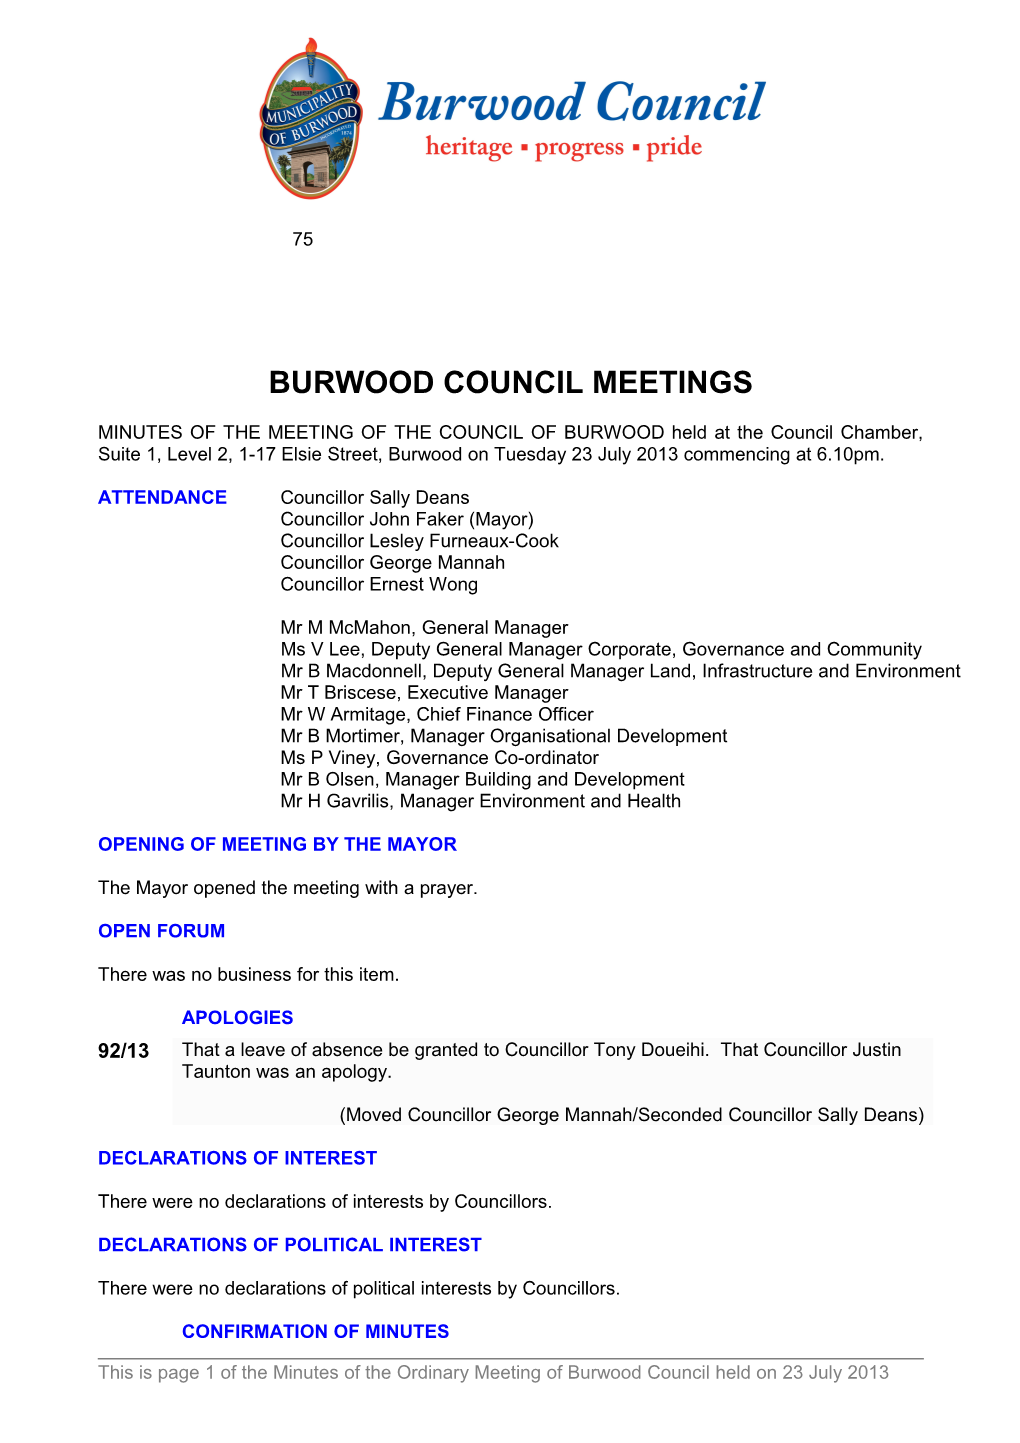 Pro-Forma Minutes of Burwood Council Meetings - 23 July 2013